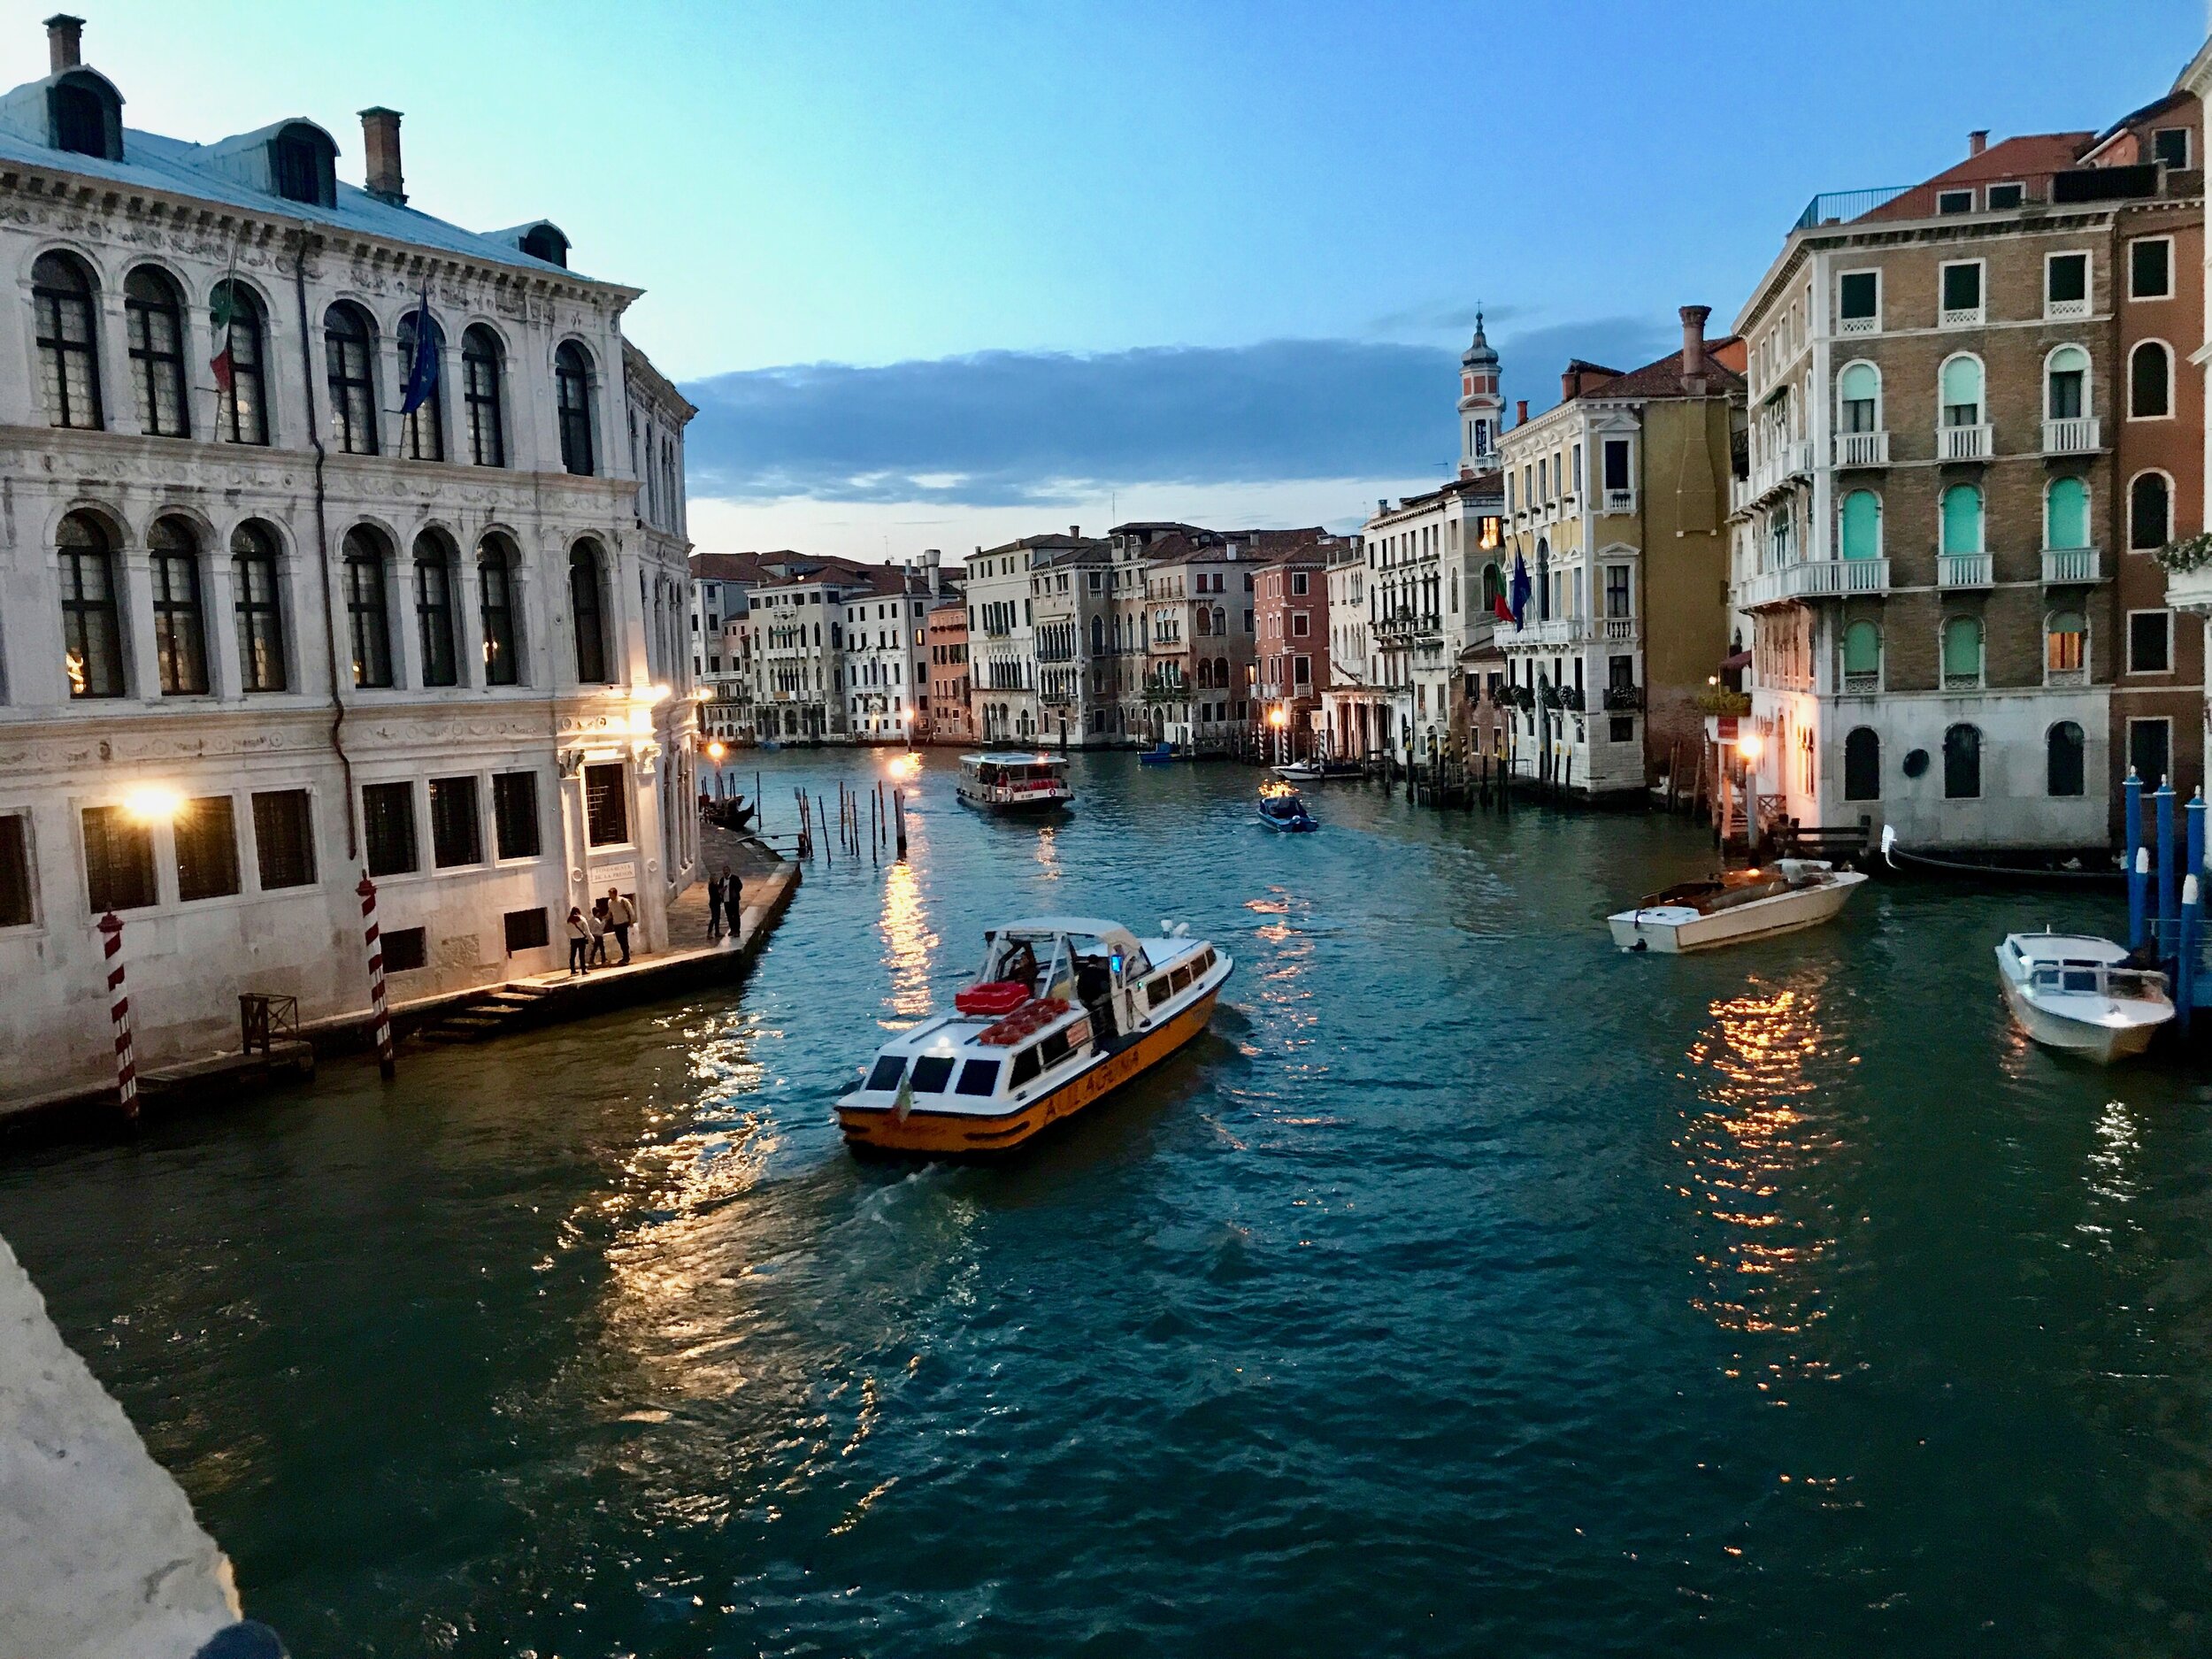 The romantic Grand Canal of Venice, Italy